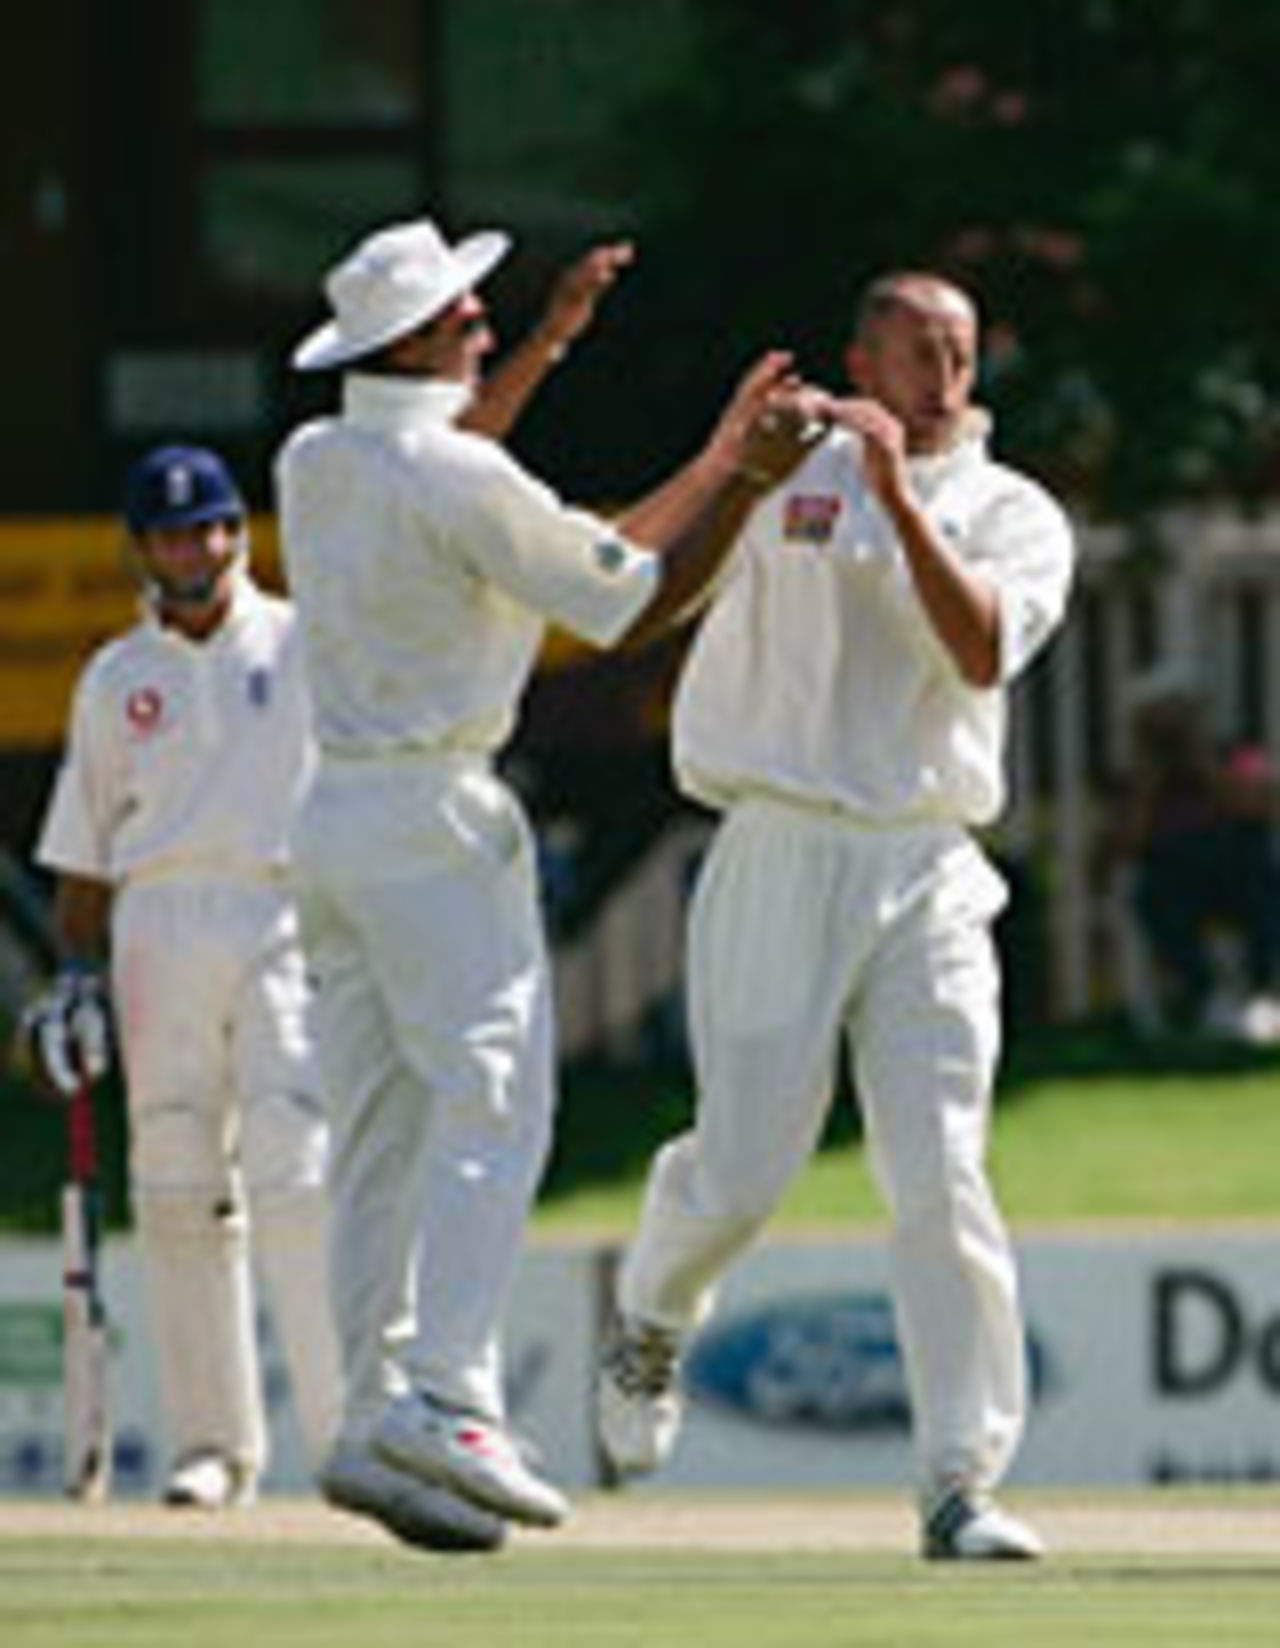 Charl Willoughby congratulated by team-mates for another wicket before tea, South Africa A v England XI, second day, Potchefstroom, December 12 2004